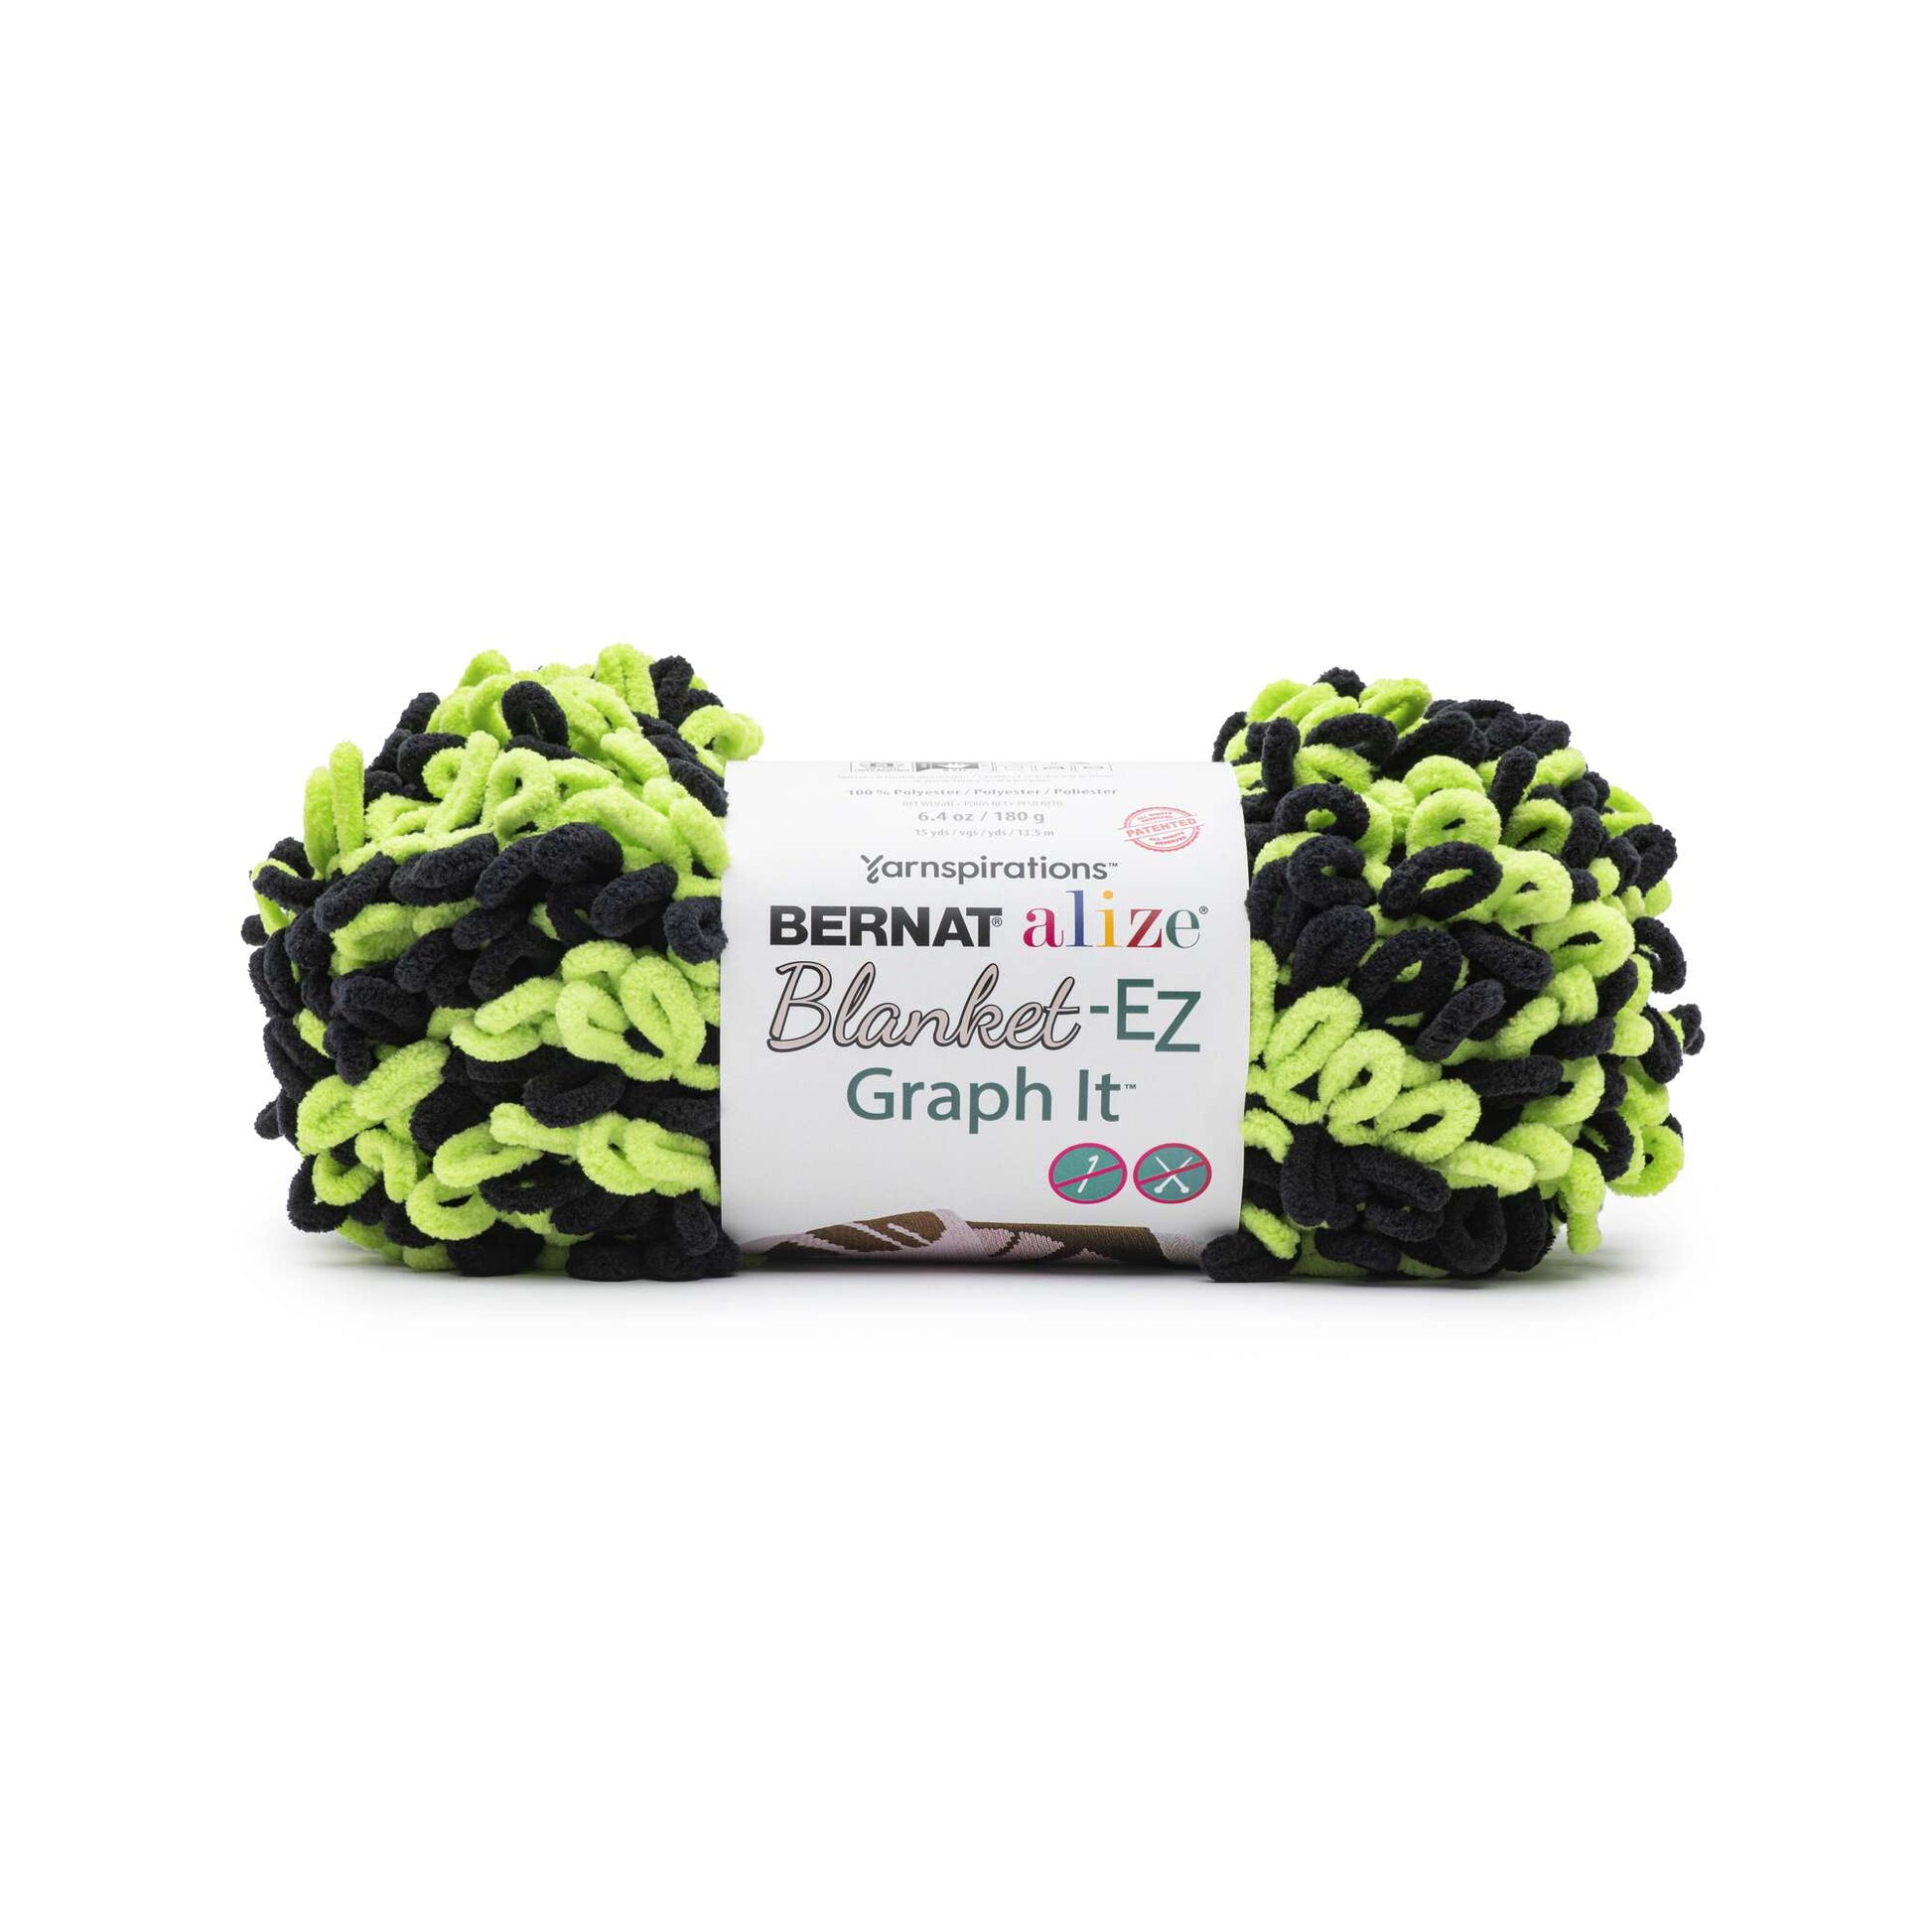 Bernat Alize Blanket-EZ Graph It Yarn - Discontinued Shades Charcoal Lime